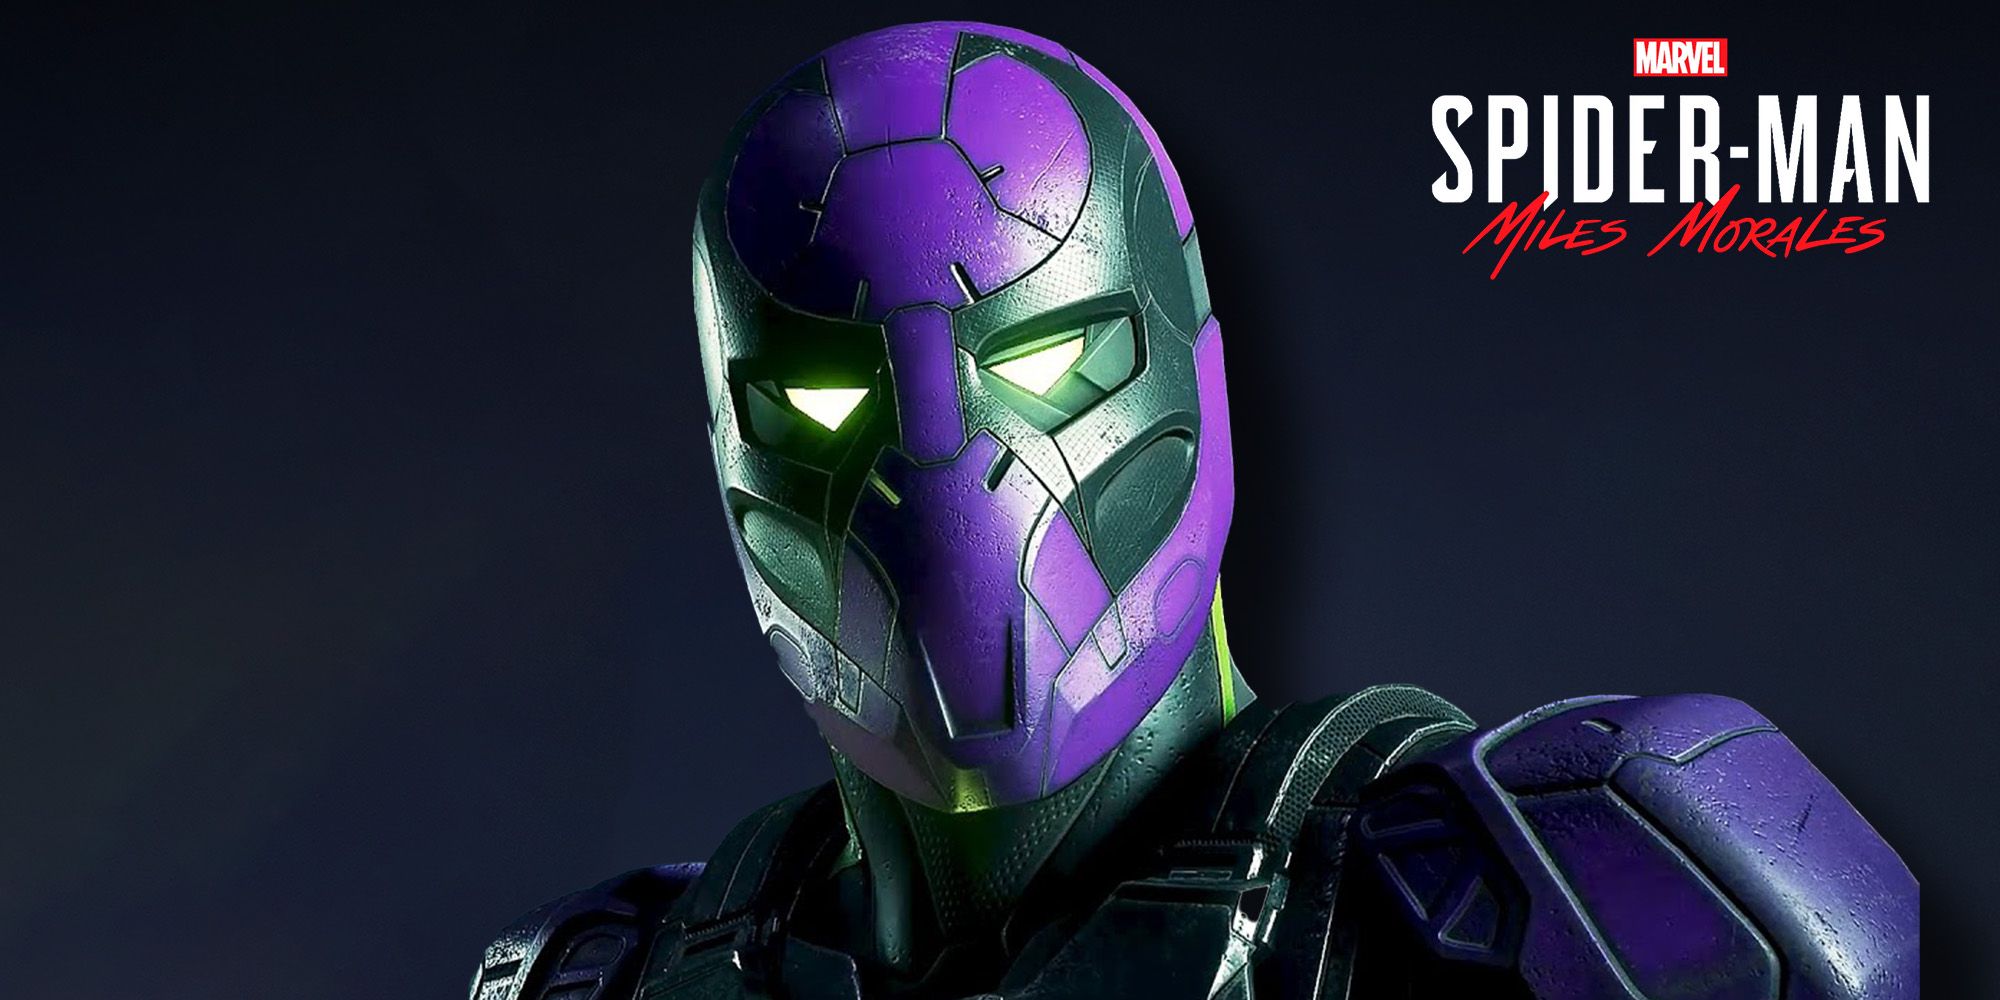 Prowler headshot with lit eyes. Spider-Man Miles Morales logo in top right of image.